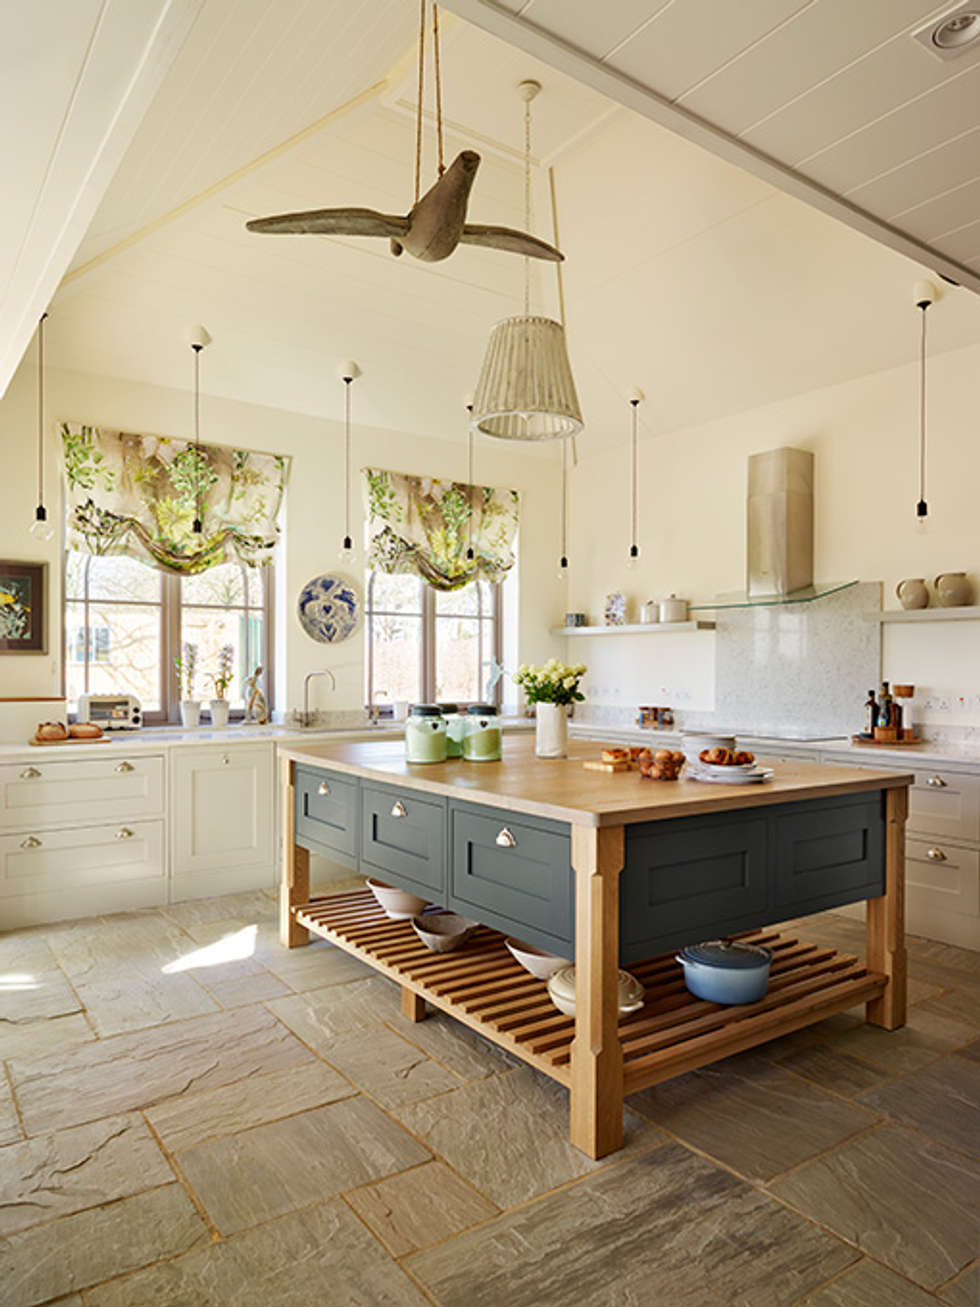 Orford | a classic country kitchen with coastal inspiration: classic ...